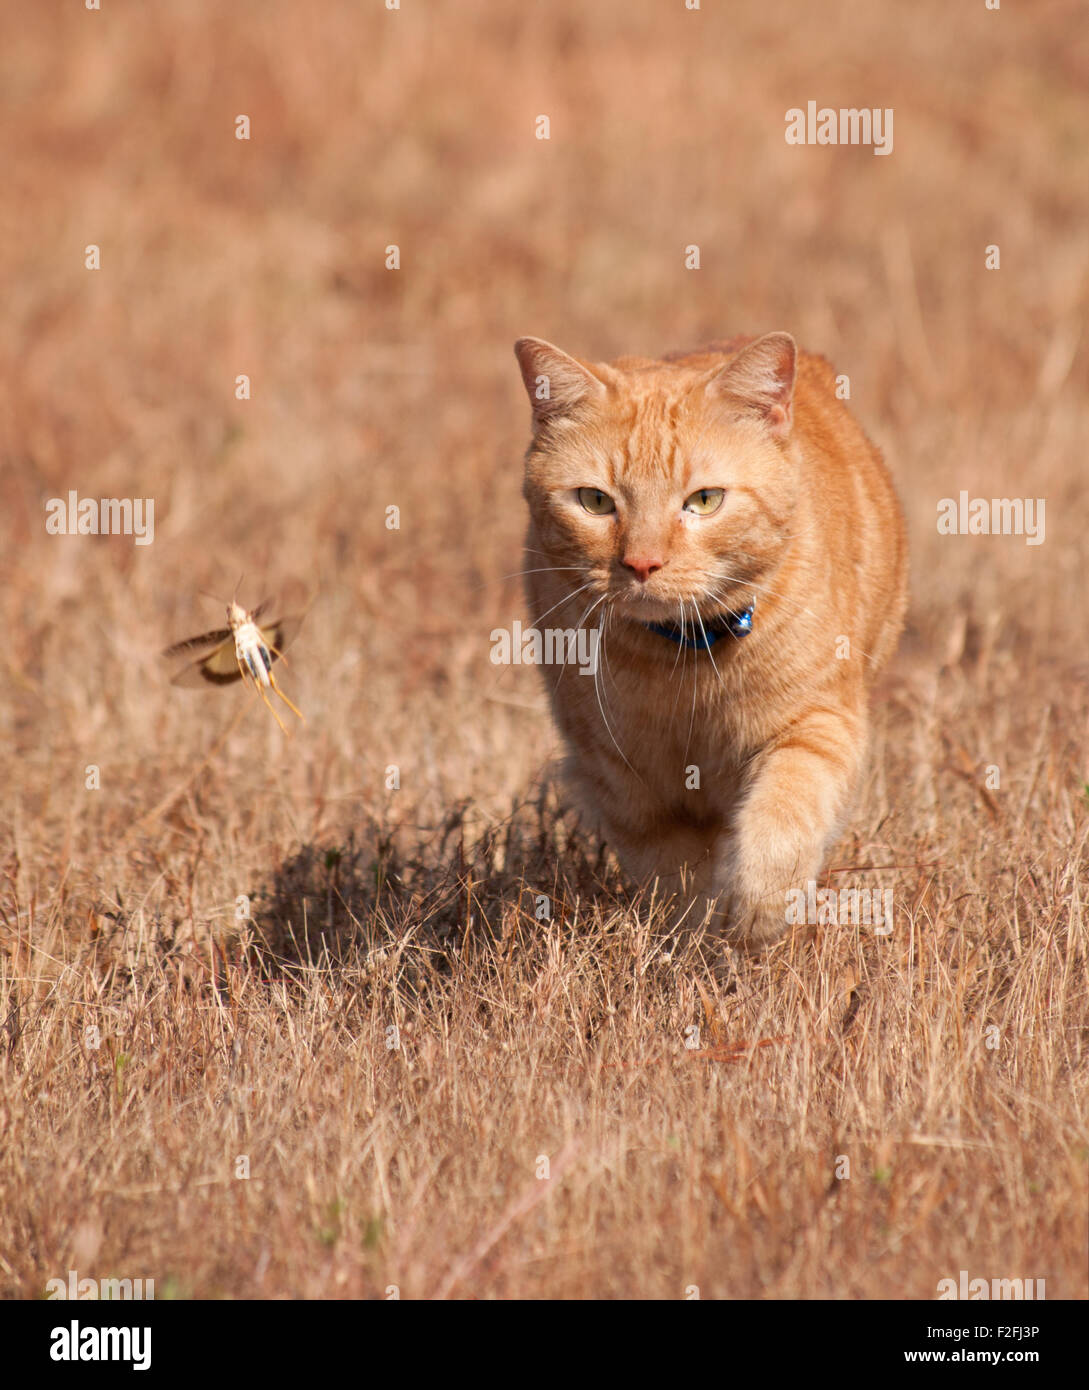 Orange tabby cat hunting a grasshopper in flight, on dry autumn grass background Stock Photo